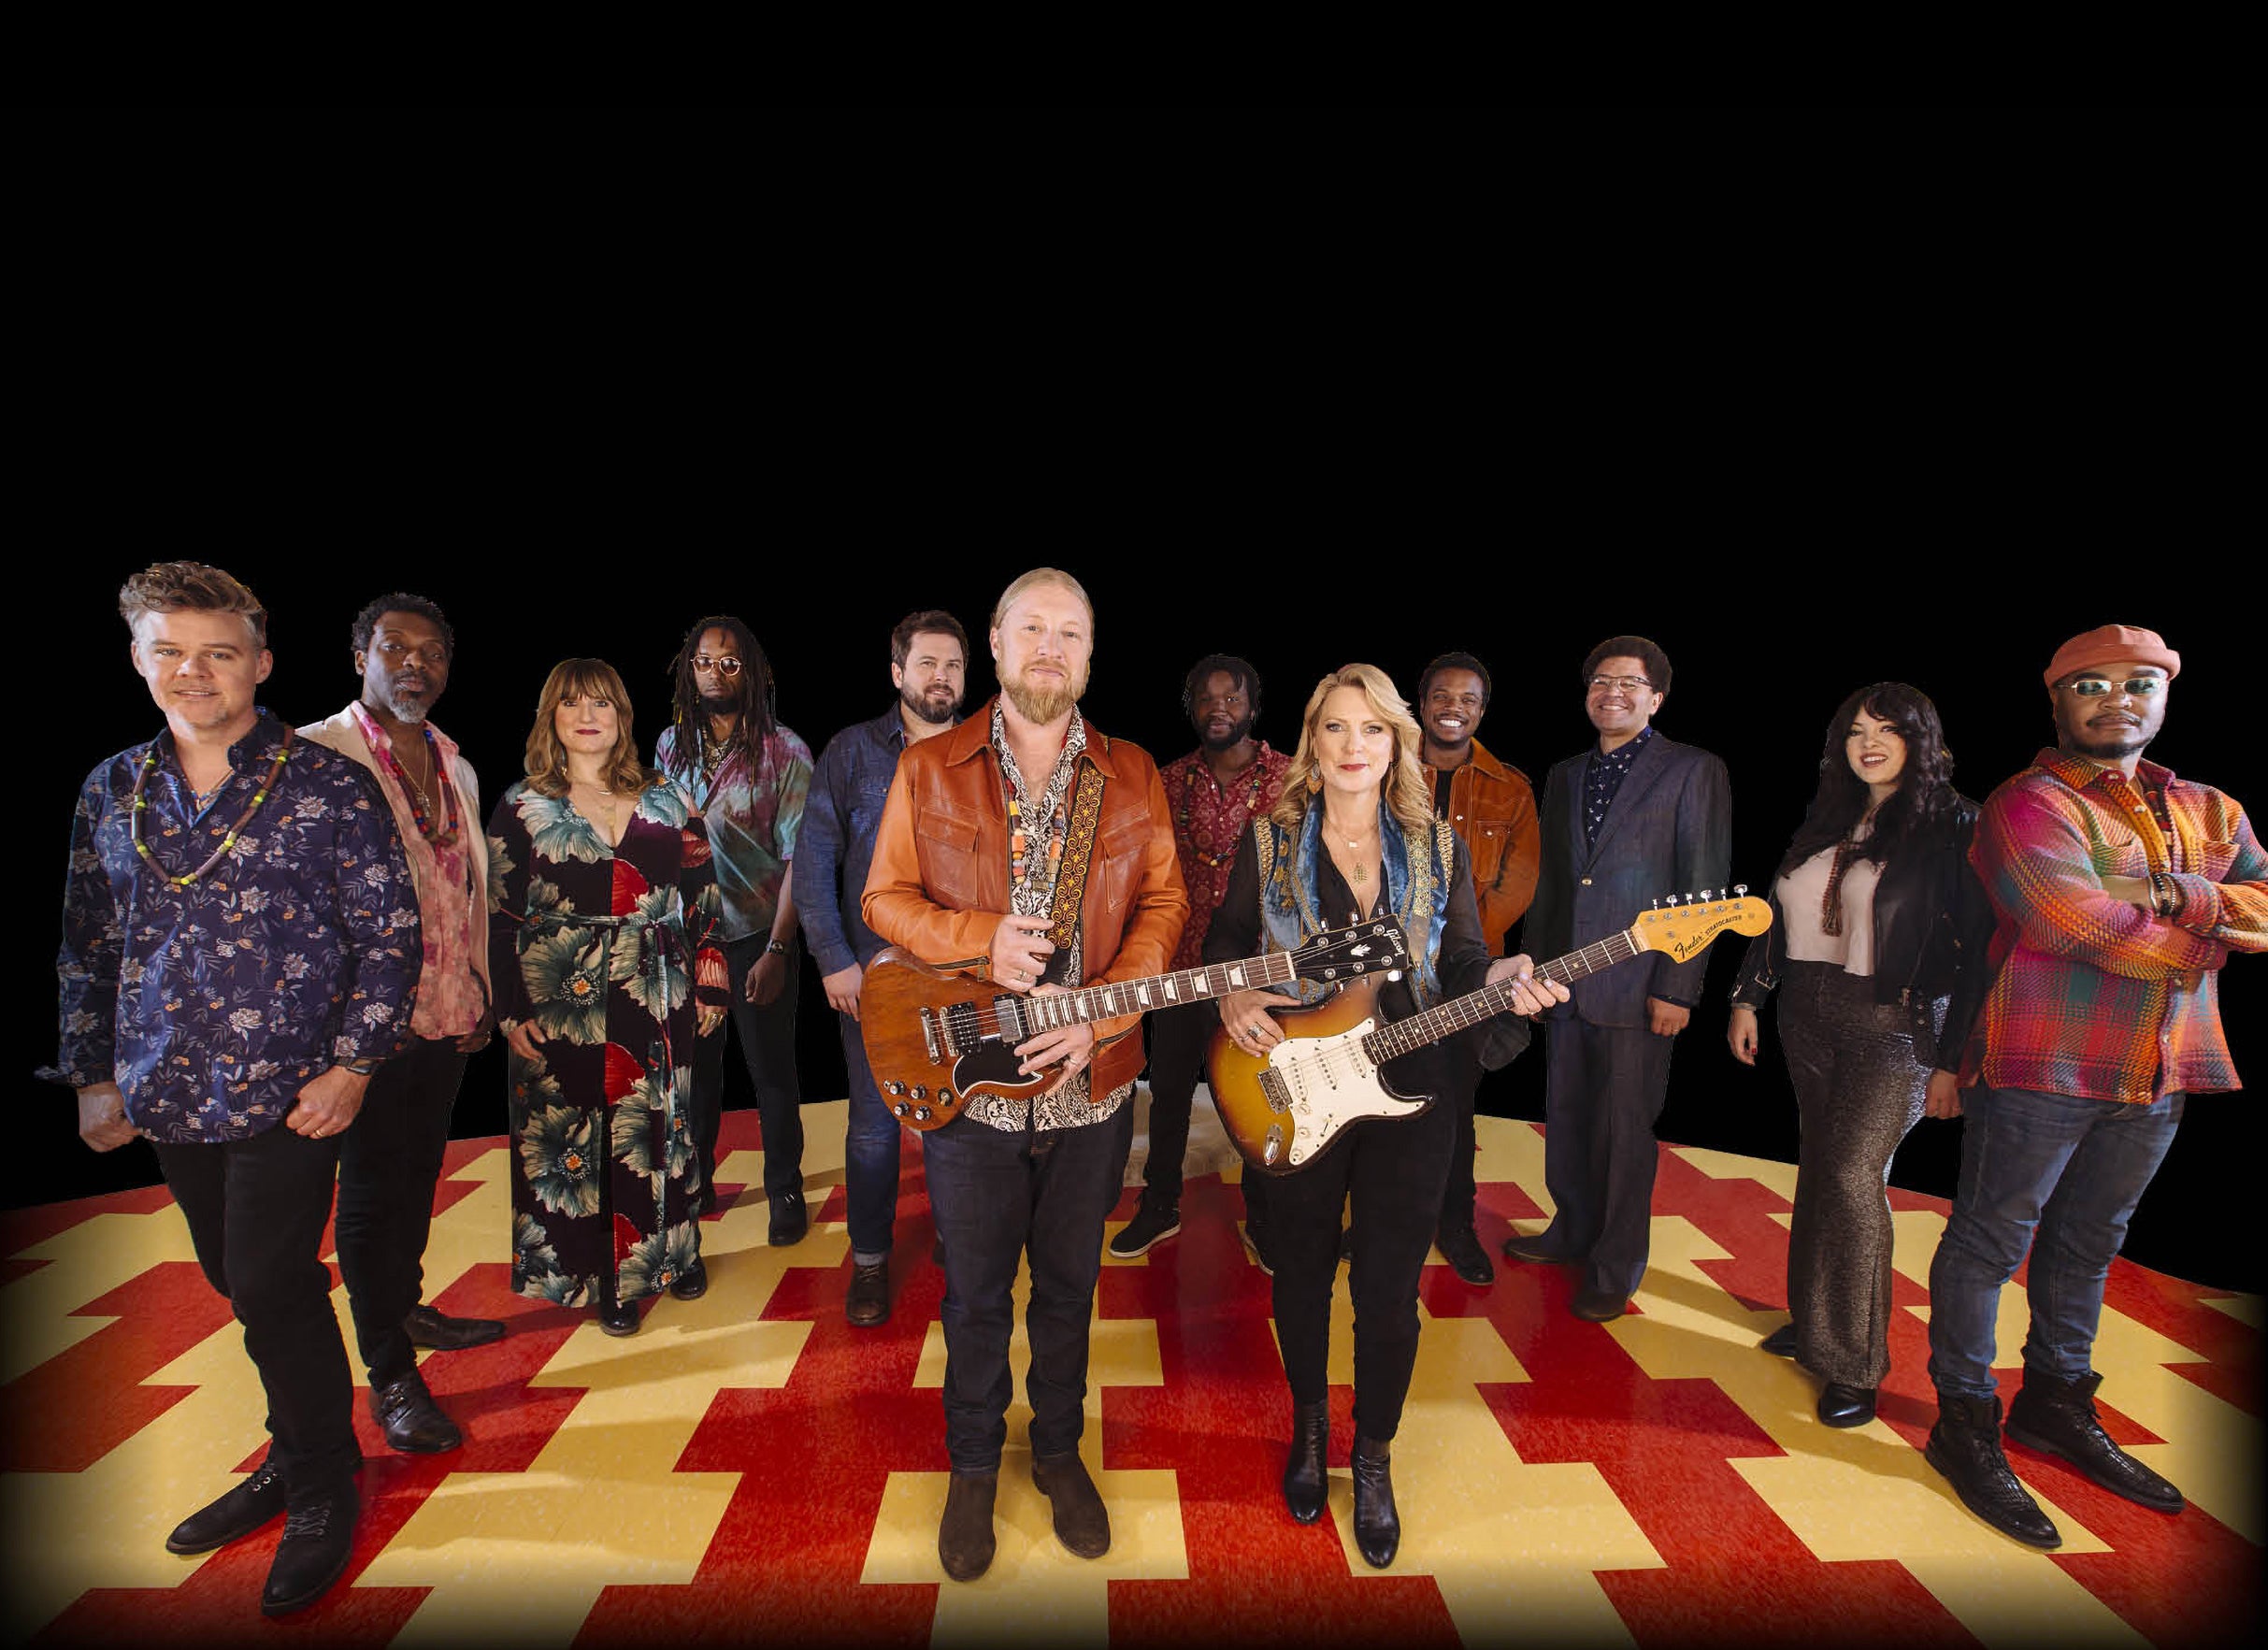 Tedeschi Trucks Band free presale password for early tickets in Newark